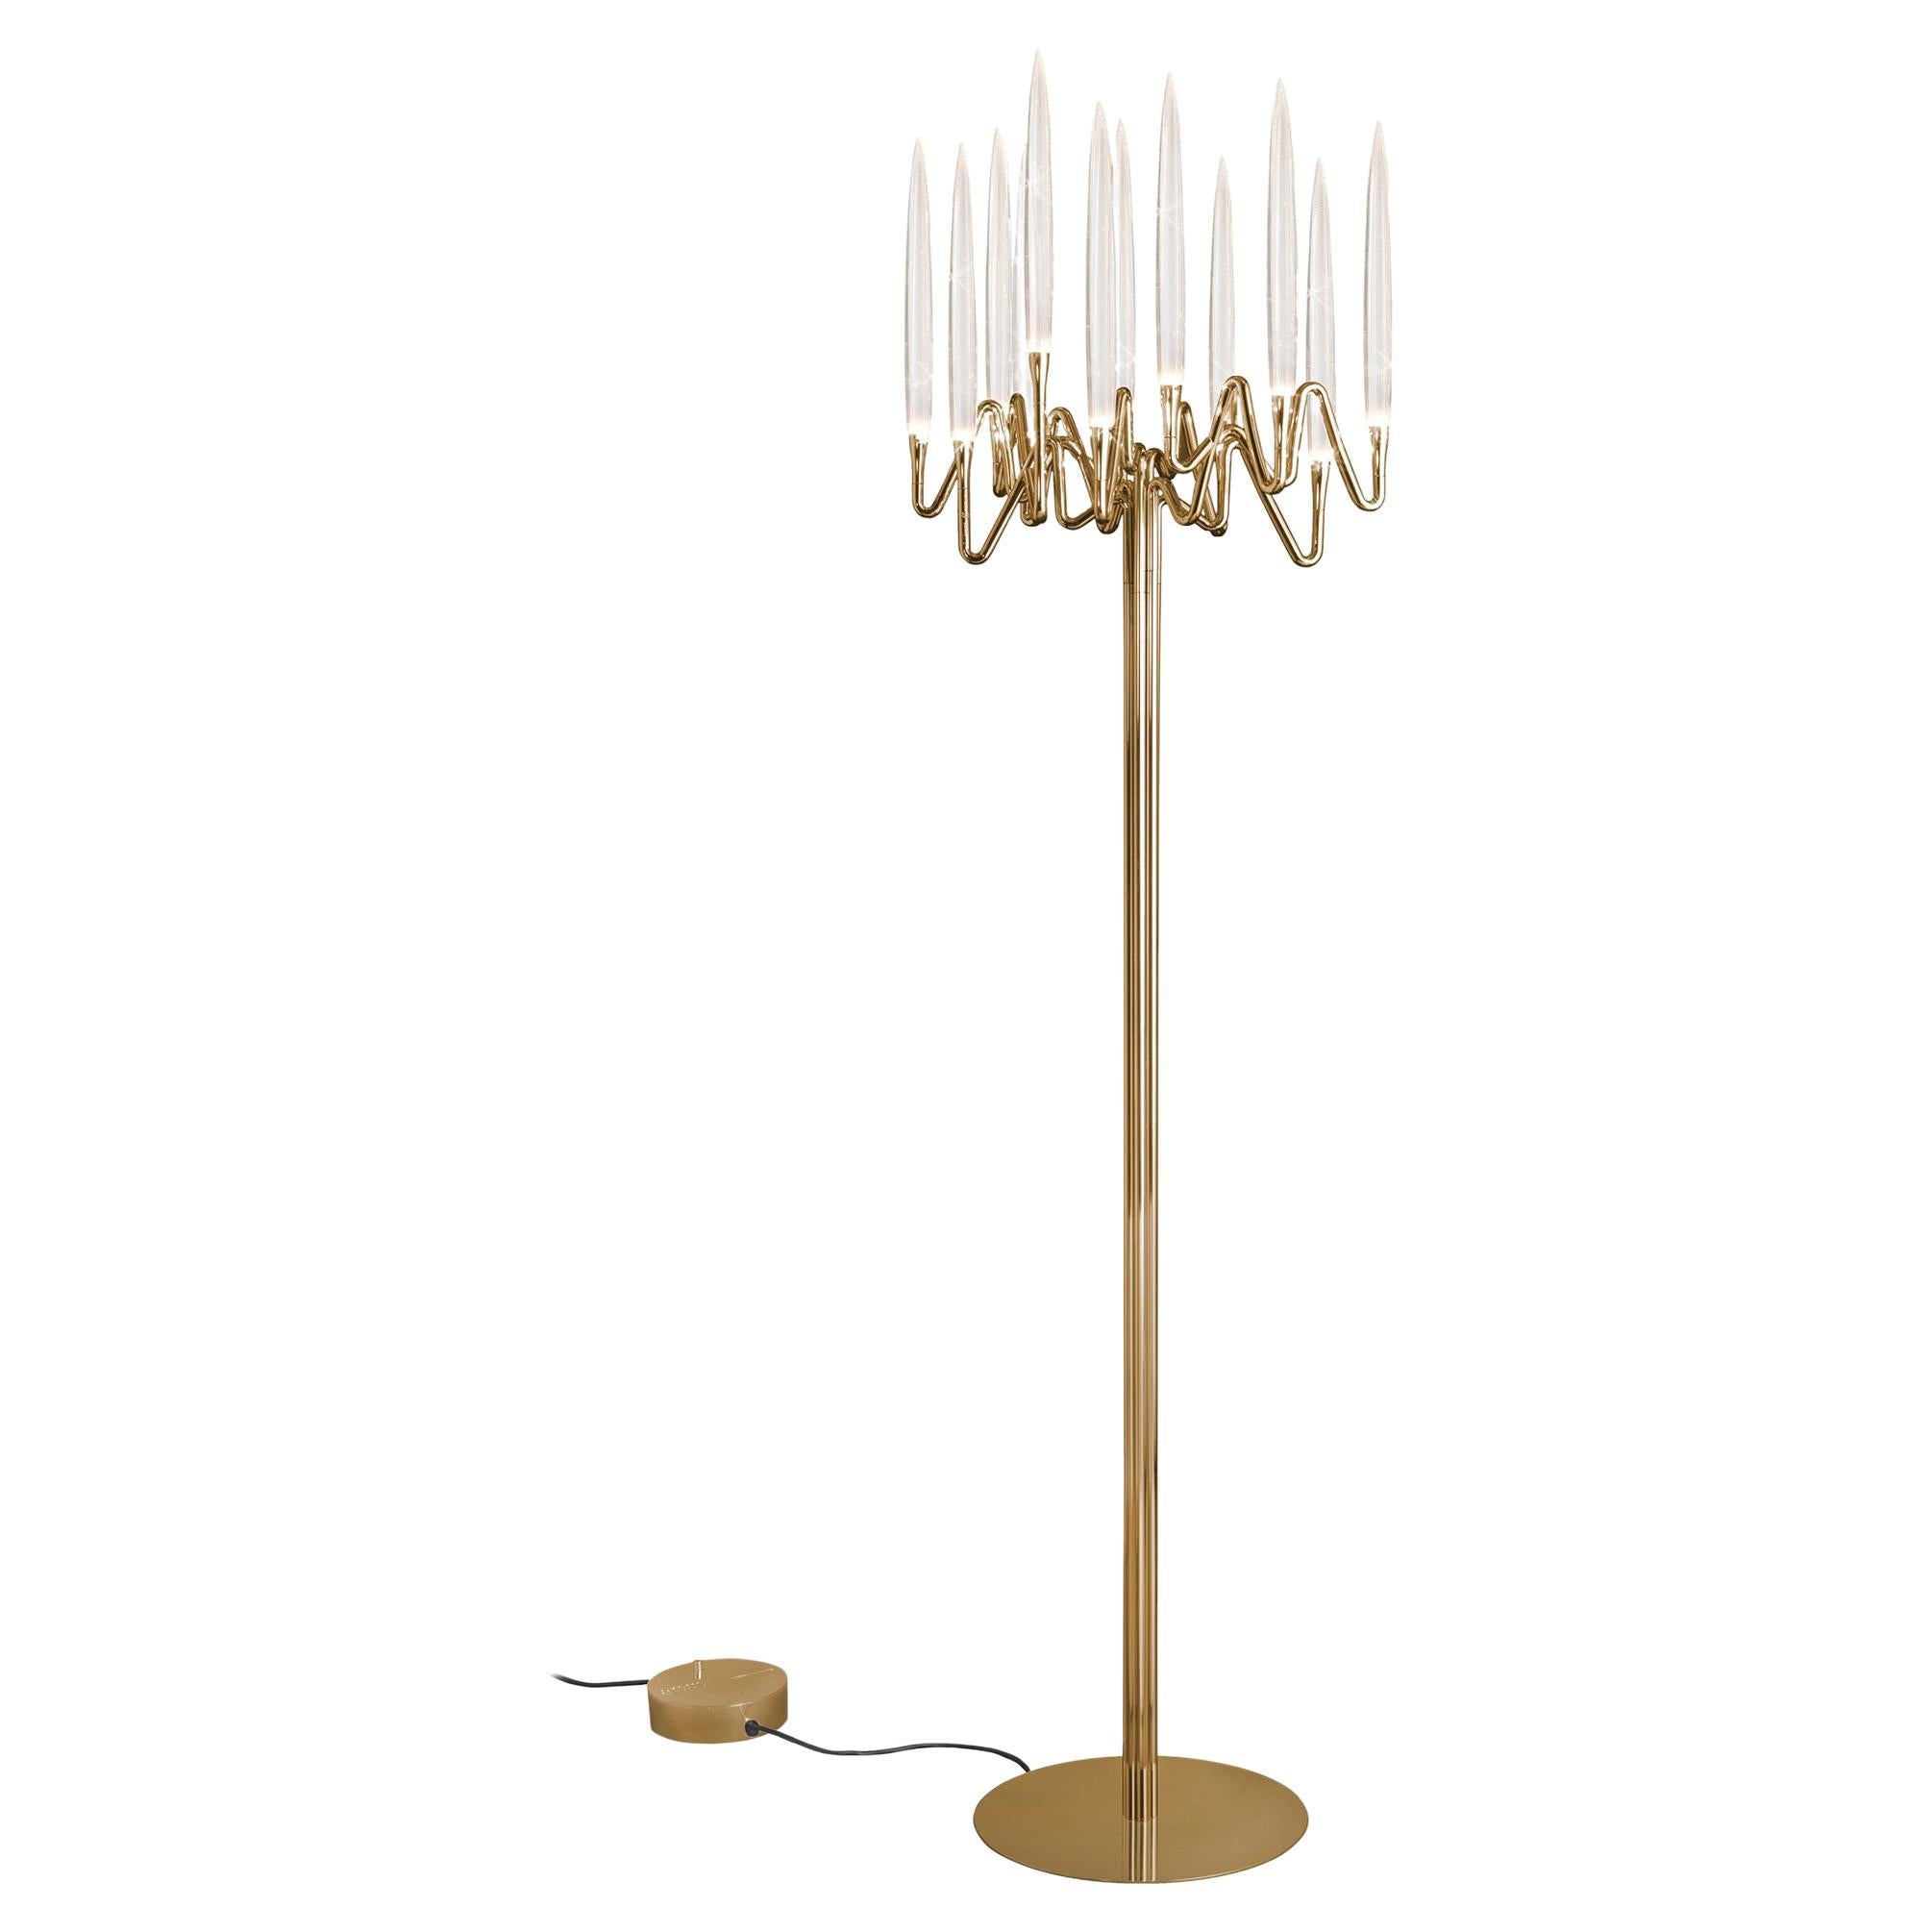 "Il Pezzo 3 Floor Lamp" - polished brass - crystal - LEDs